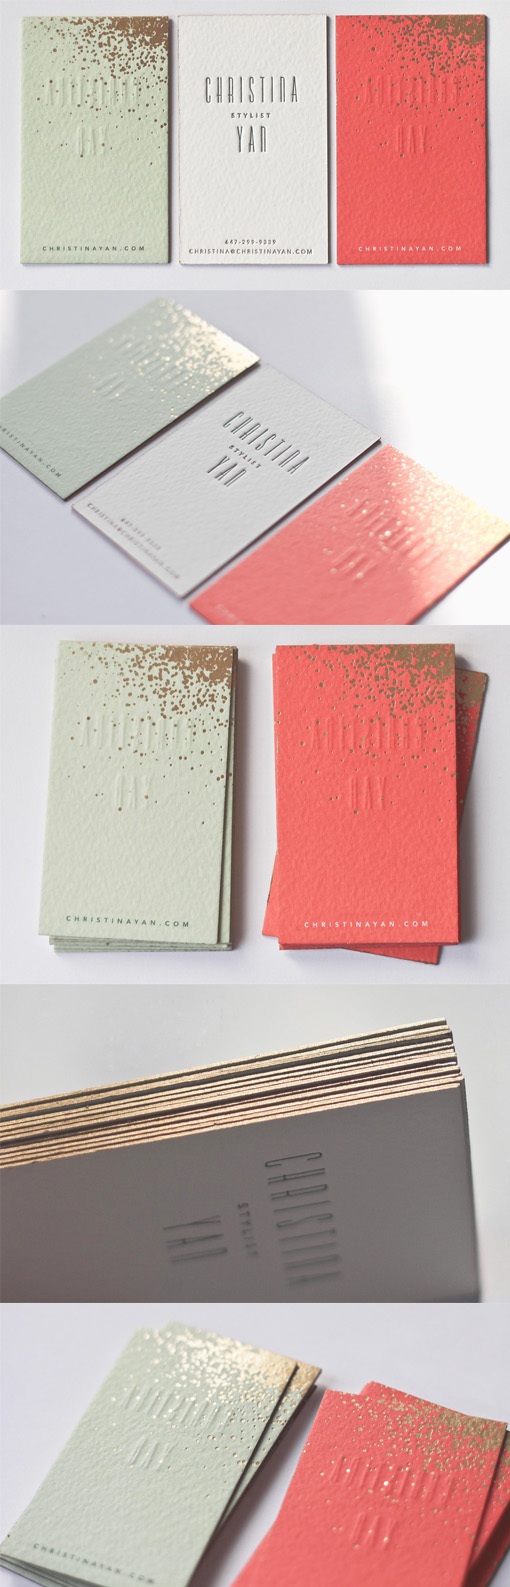 Stylish Modern Minimalist Design Letterpress Business Card With Gold Accents